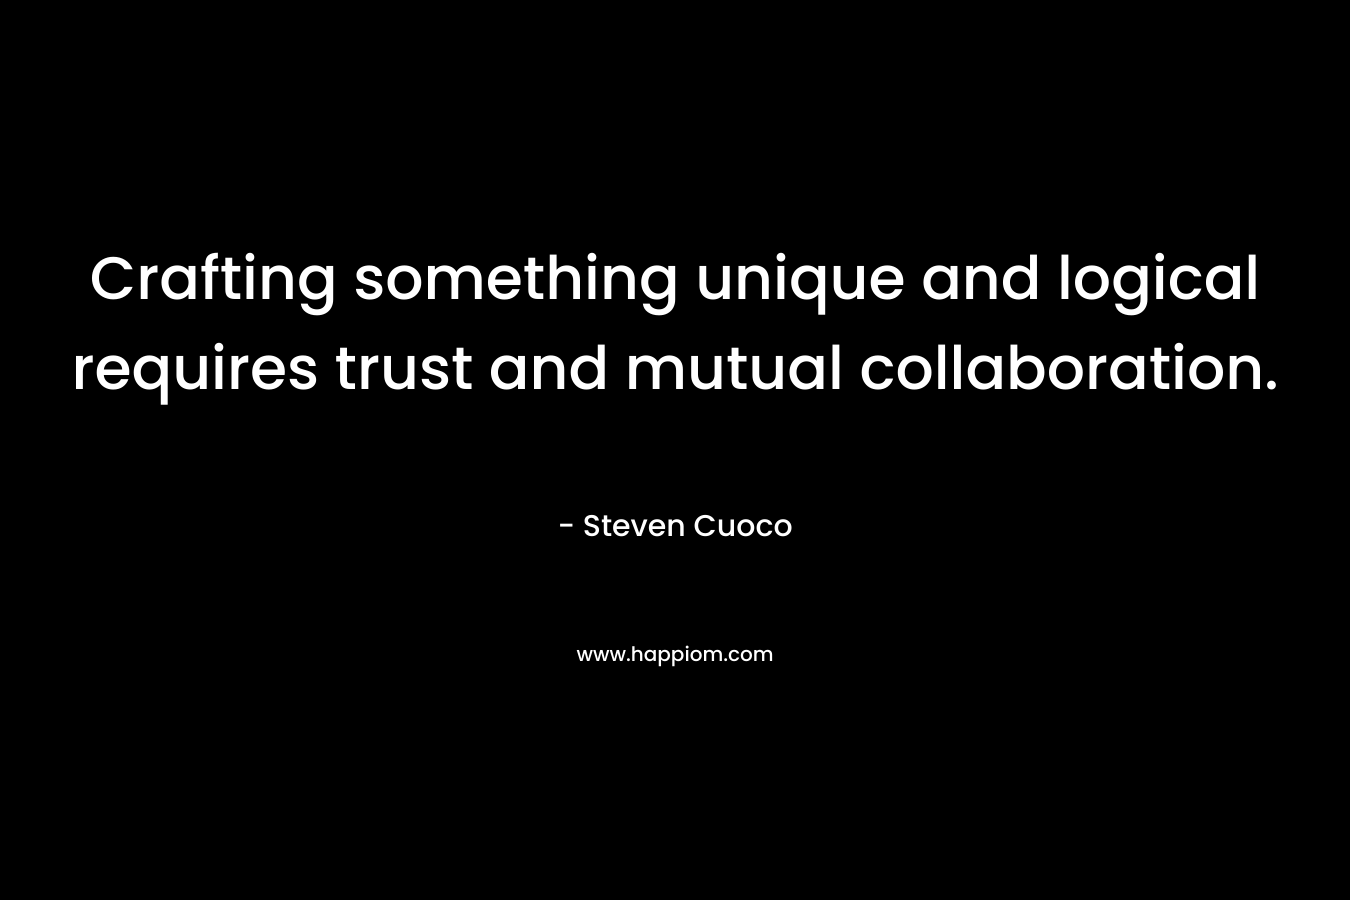 Crafting something unique and logical requires trust and mutual collaboration.